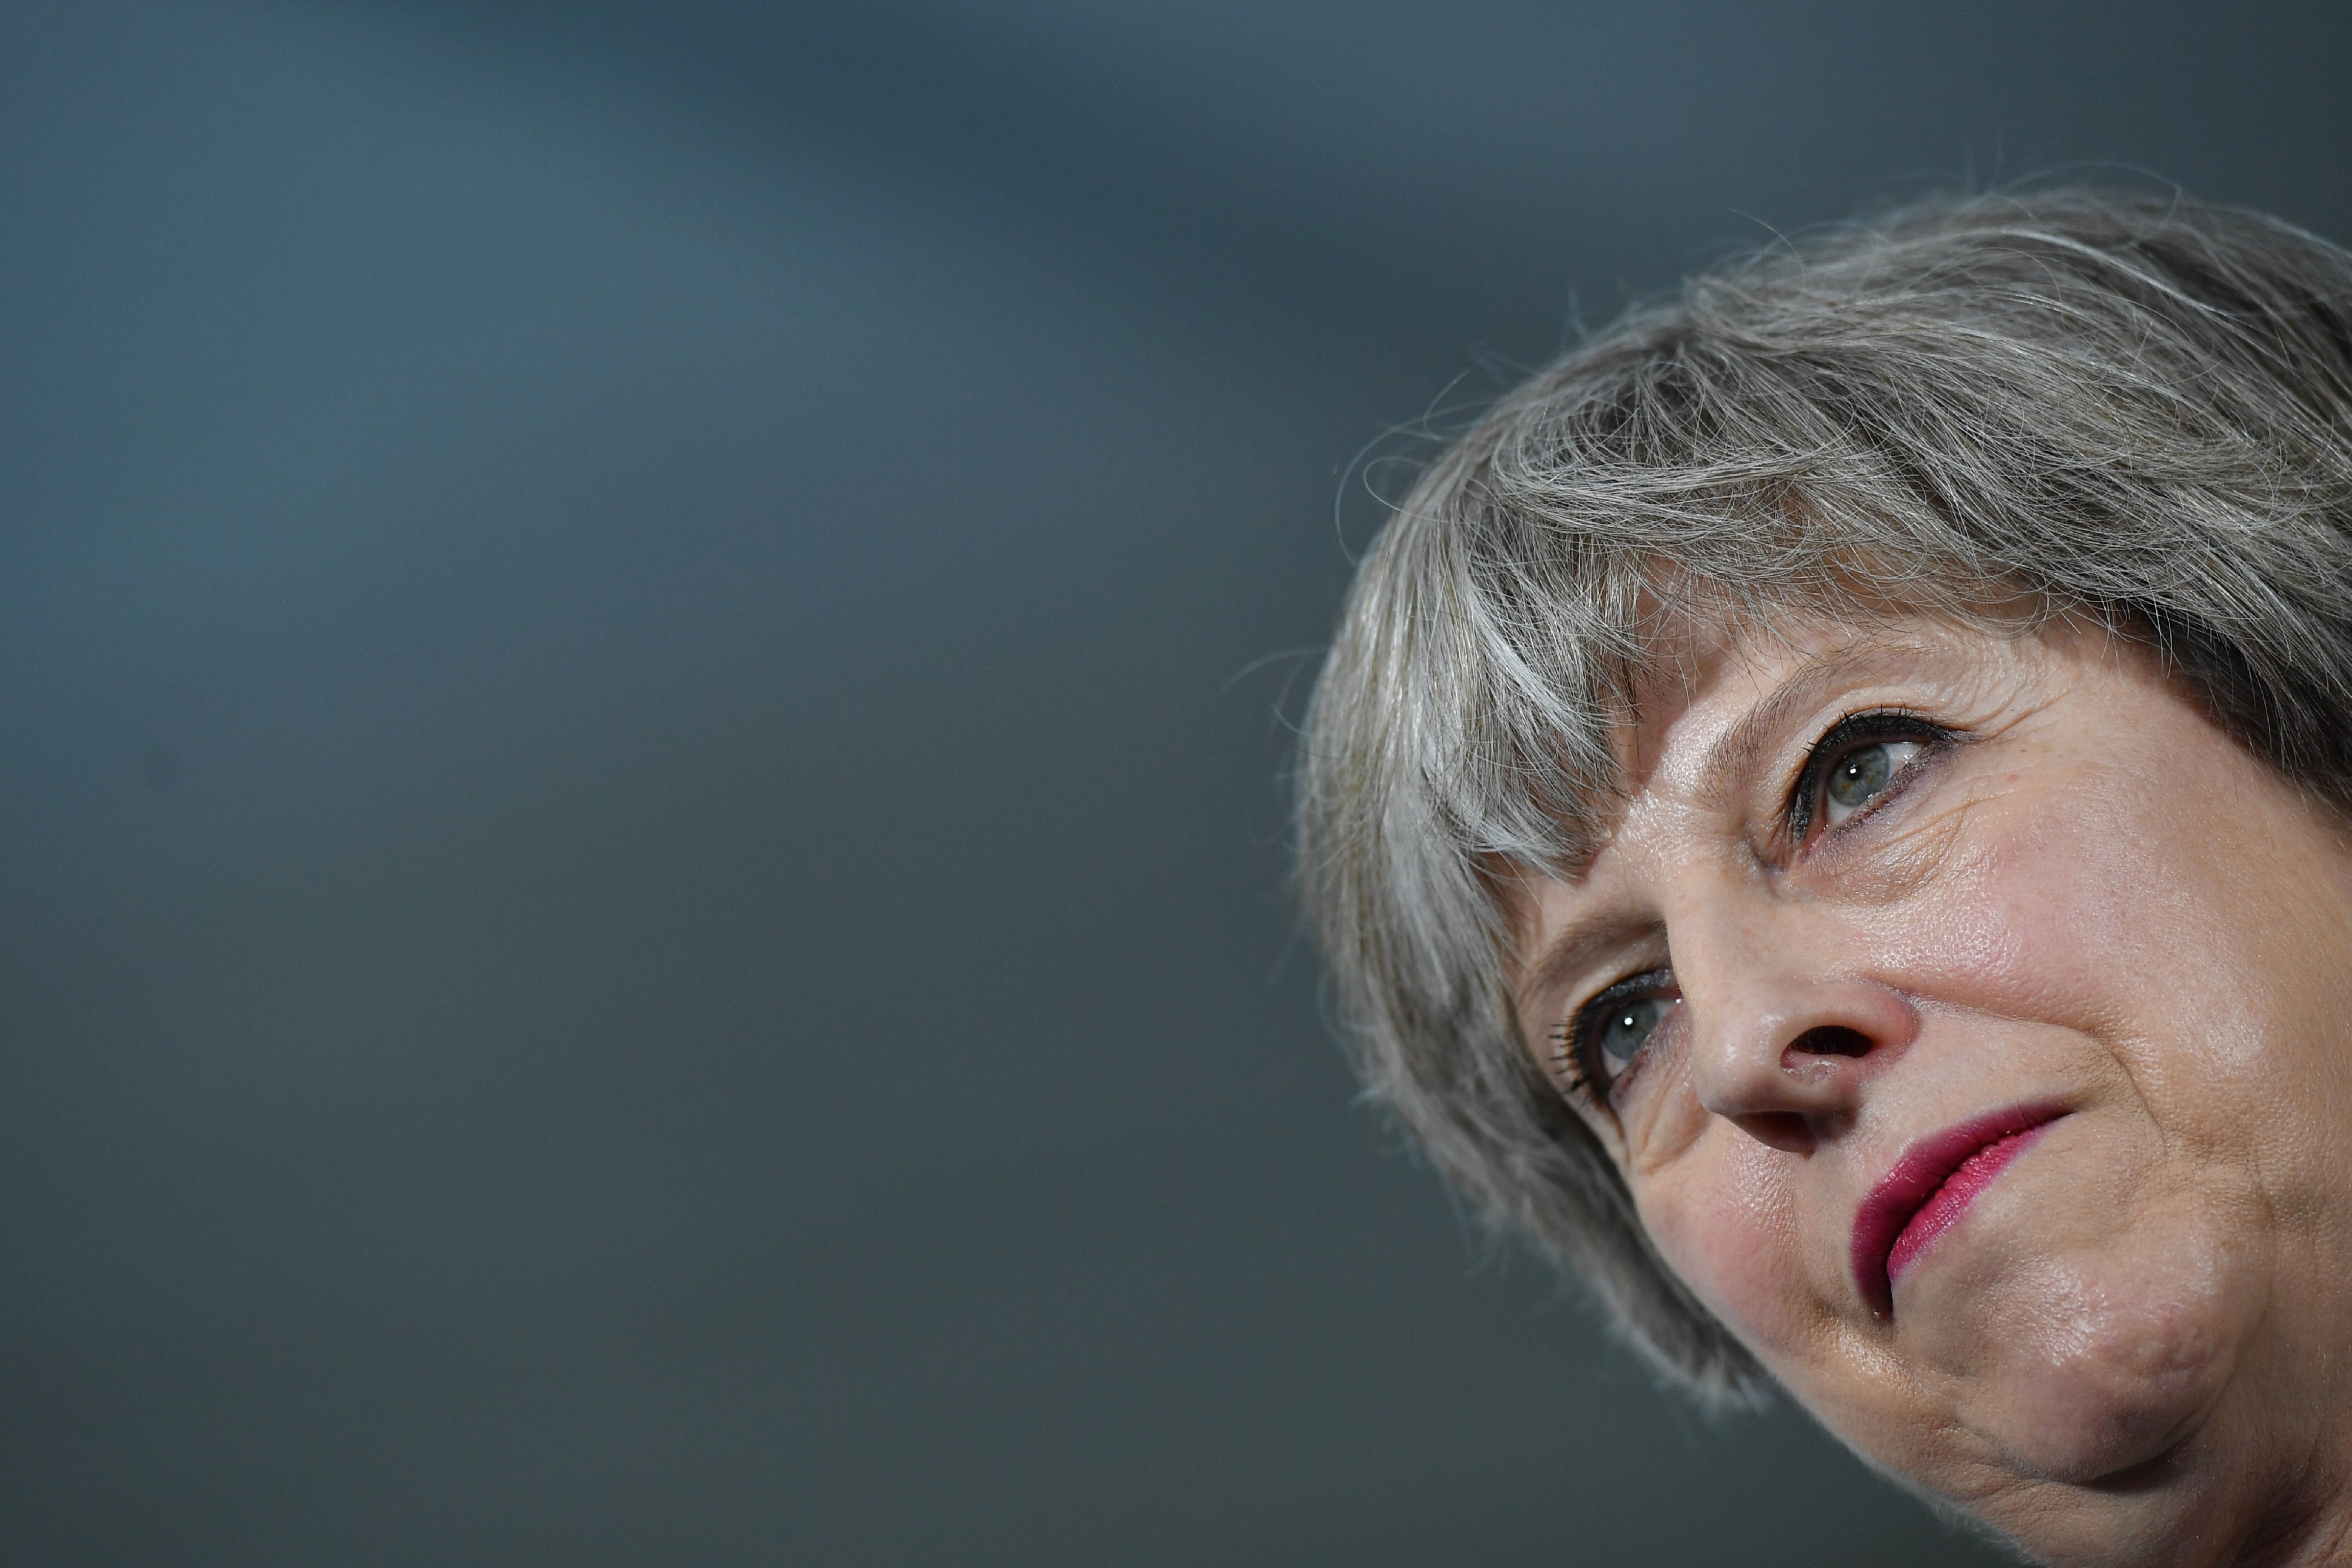 British Prime Minister Theresa May delivers a speech during an election campaign visit to Stoke-on-Trent, England, on June 6, 2017. (Ben Stansall—WPA/Pool/Getty Images)